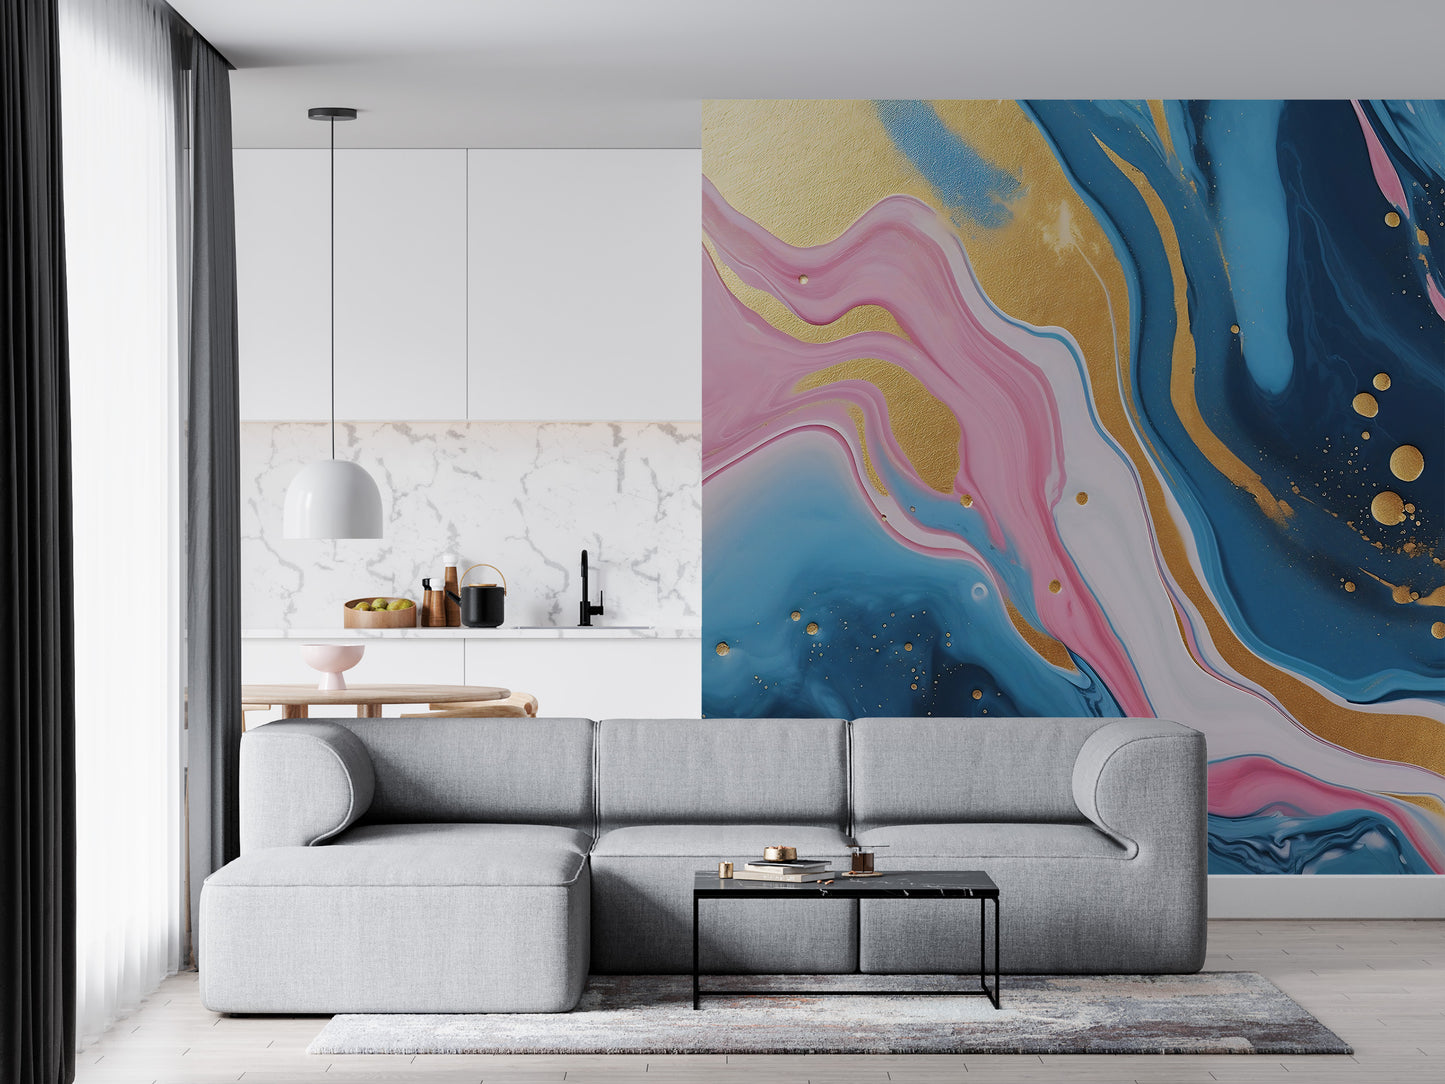 Easy-to-Apply Abstract Wallpaper with Eye-Catching Liquid Art Patterns